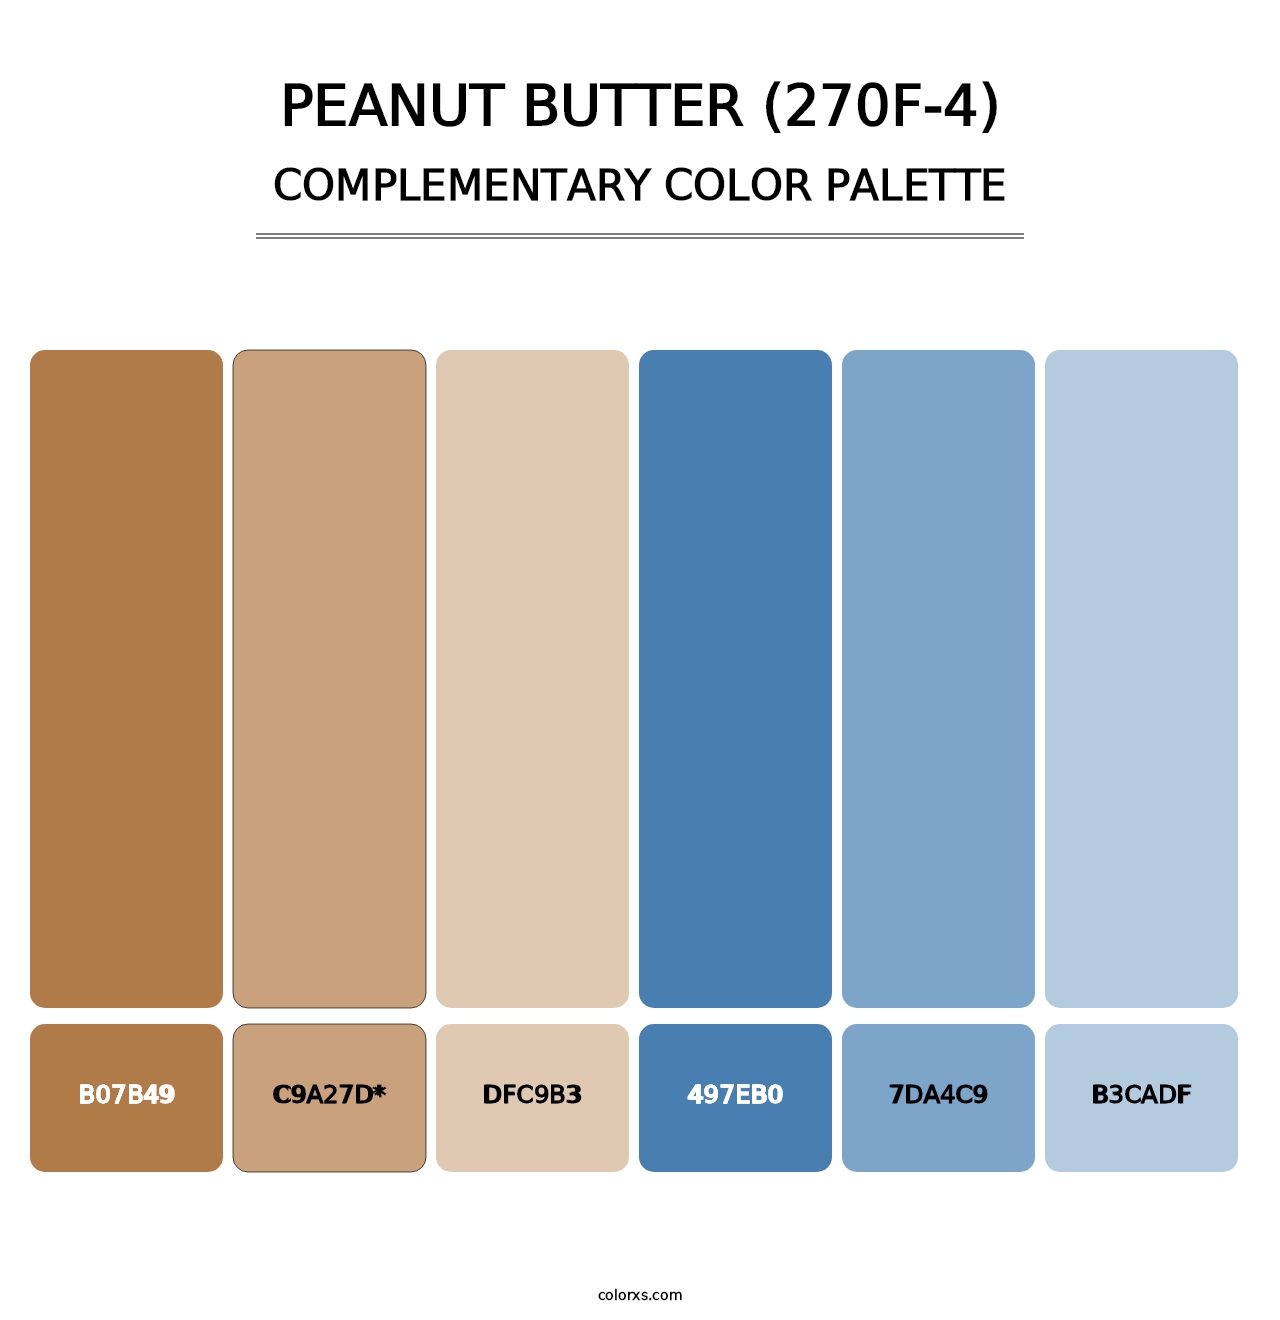 Peanut Butter (270F-4) - Complementary Color Palette